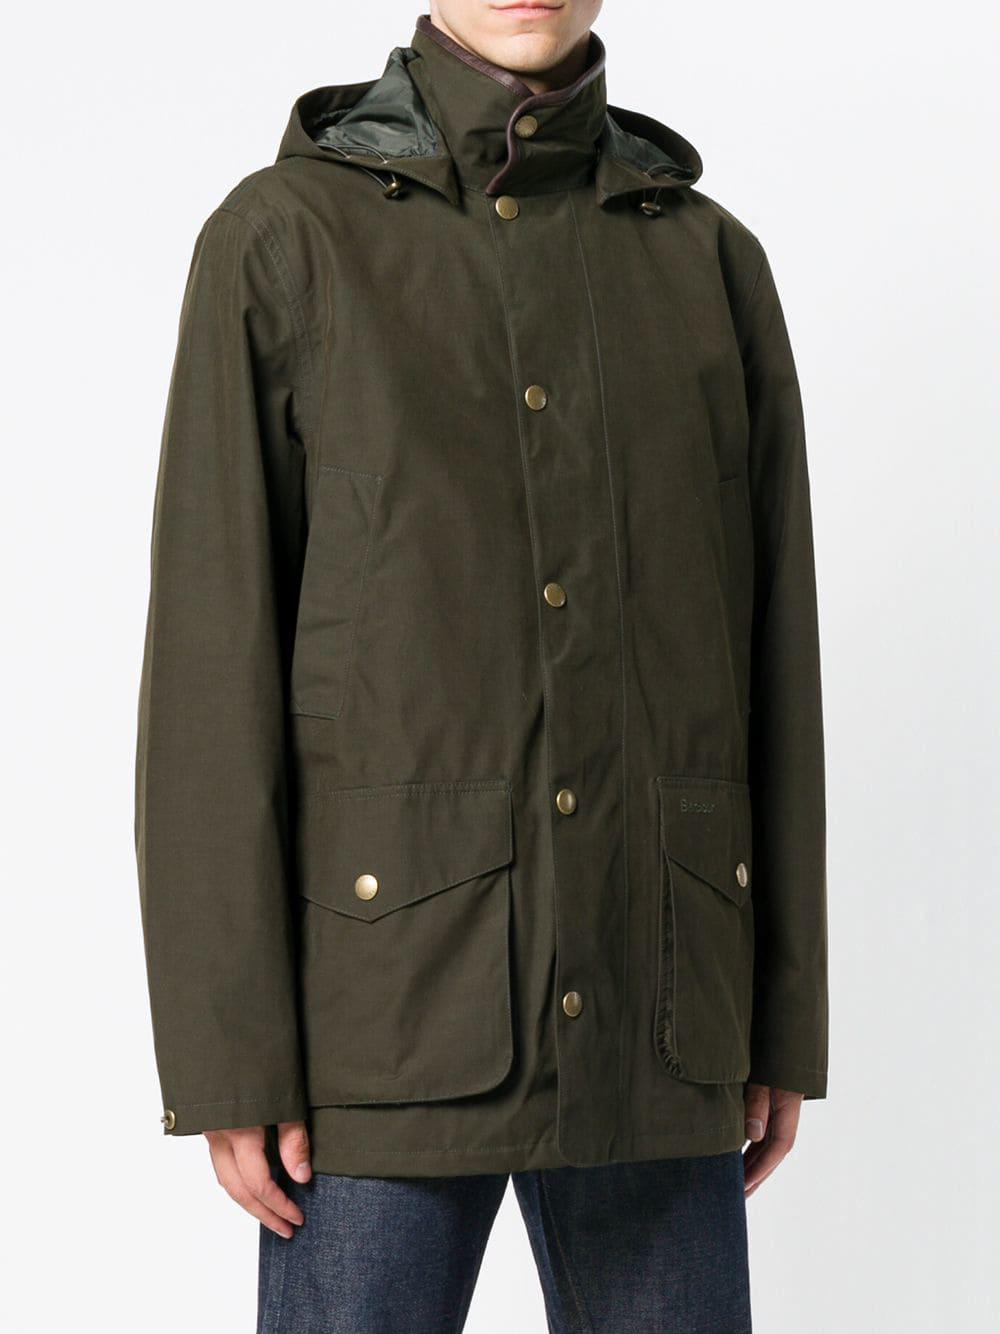 Barbour Cotton Mallaig Jacket in Green 